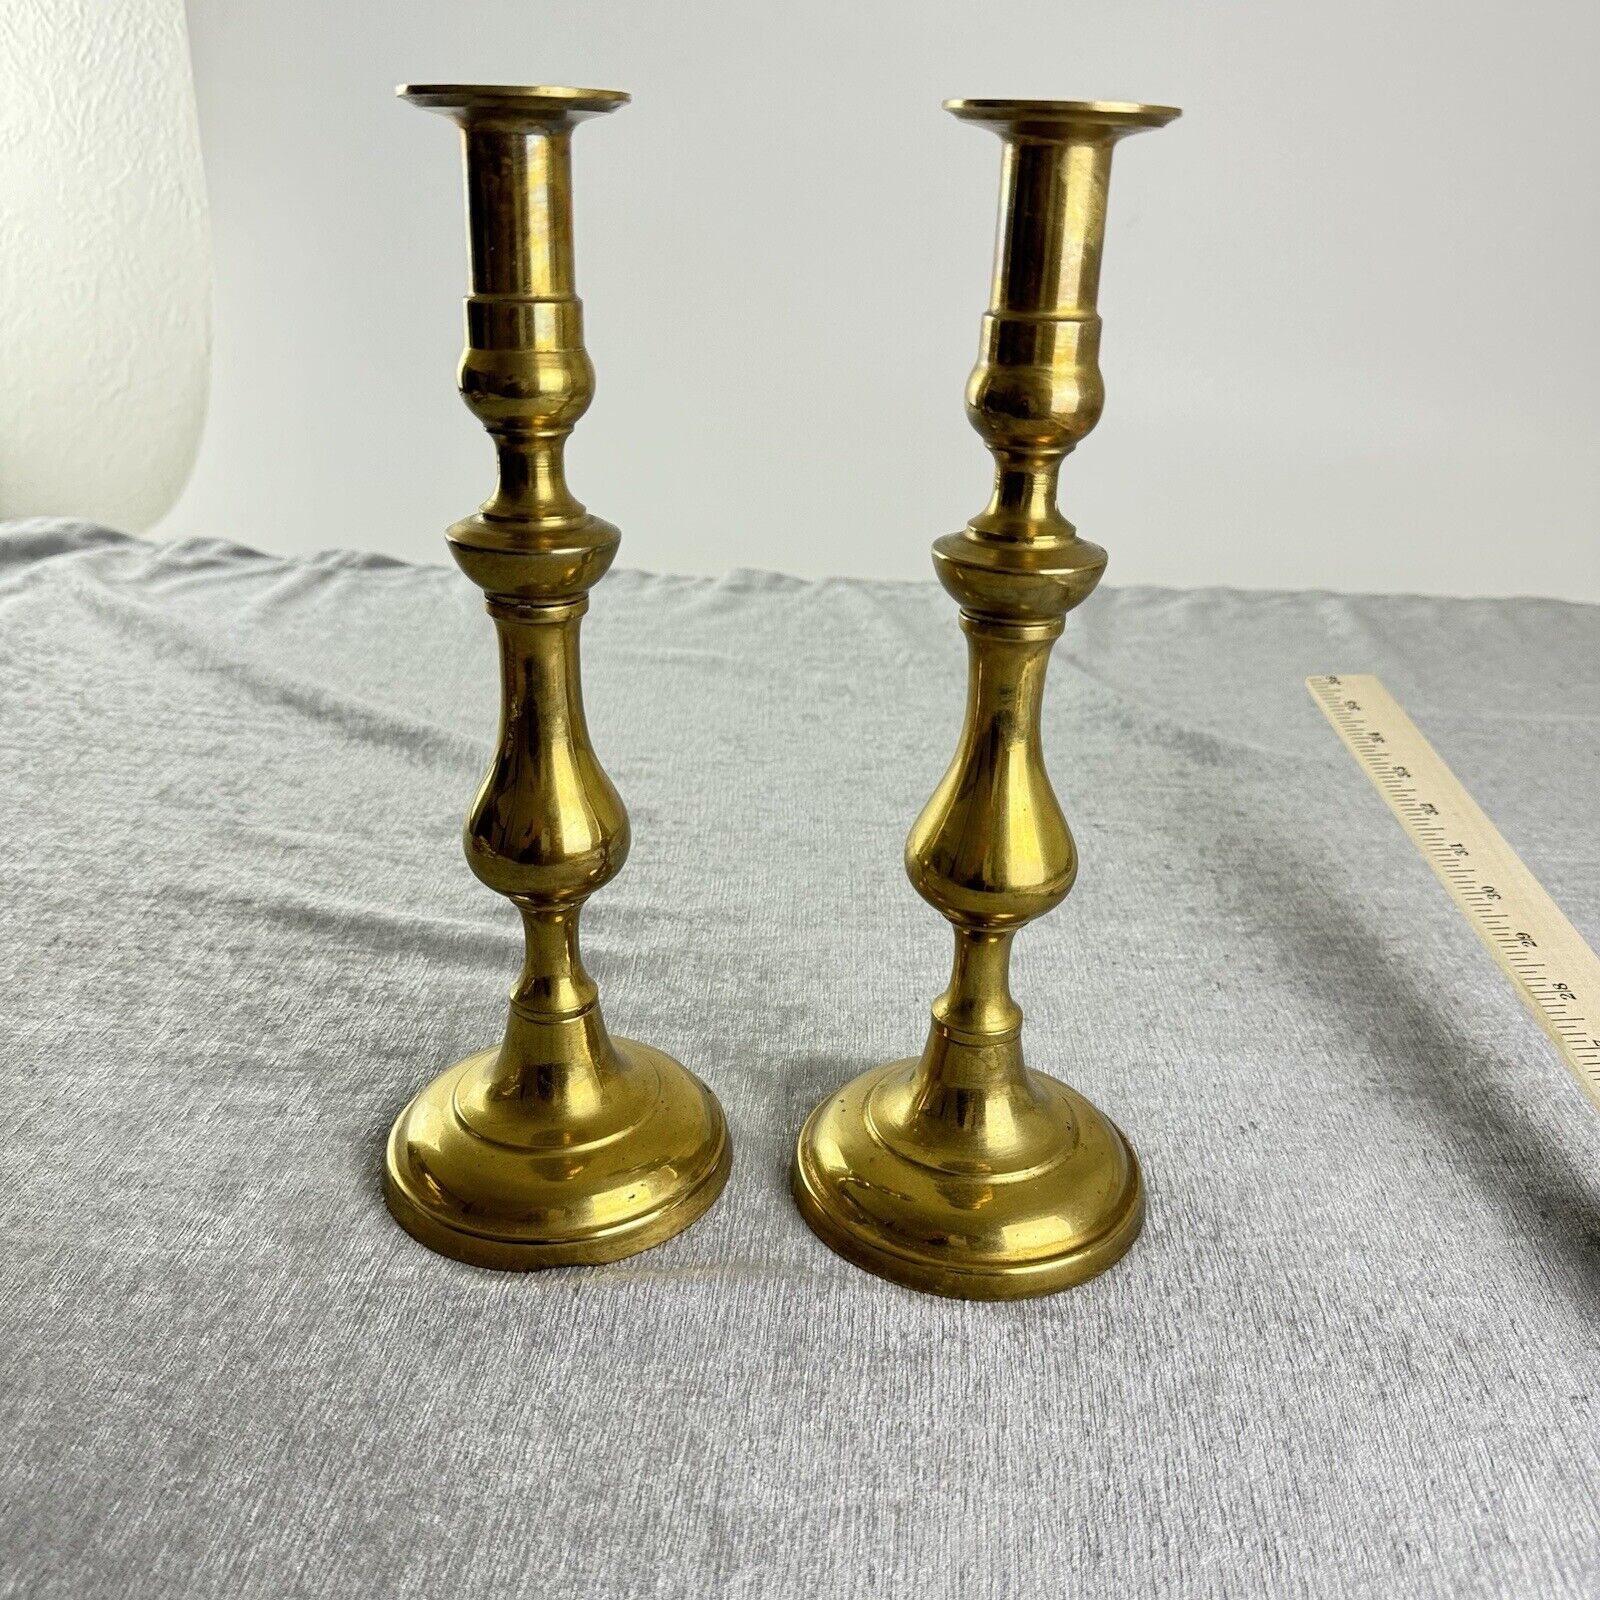 Vtg  Candlestick Candle Holders Brass PAIR   11” Wedding Events Decor Home Glam